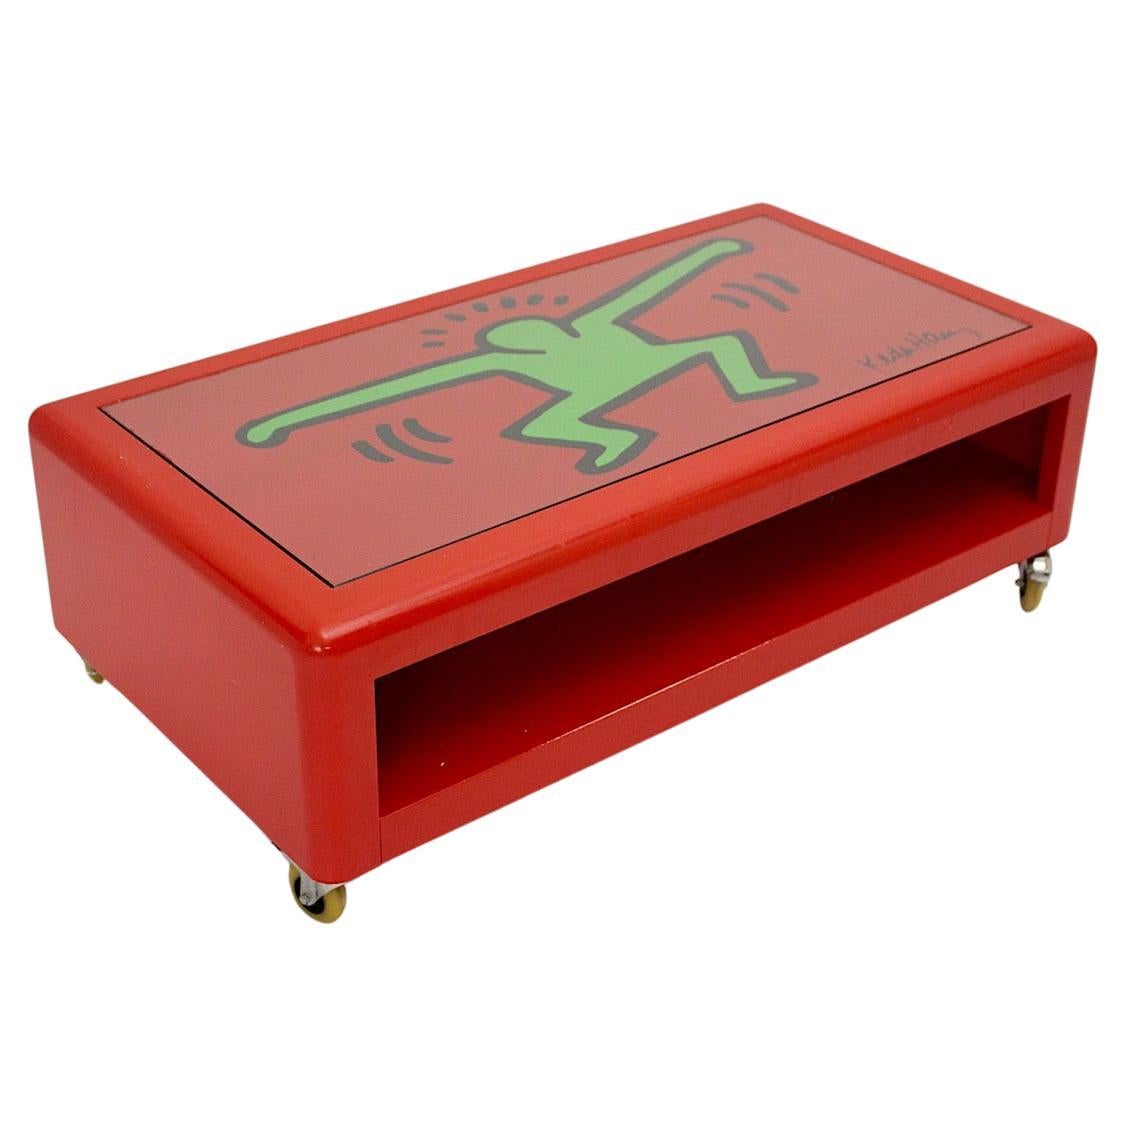 Keith Haring Low Pop Art Sofa Table Red Green Metal Bretz 1998 Germany For Sale